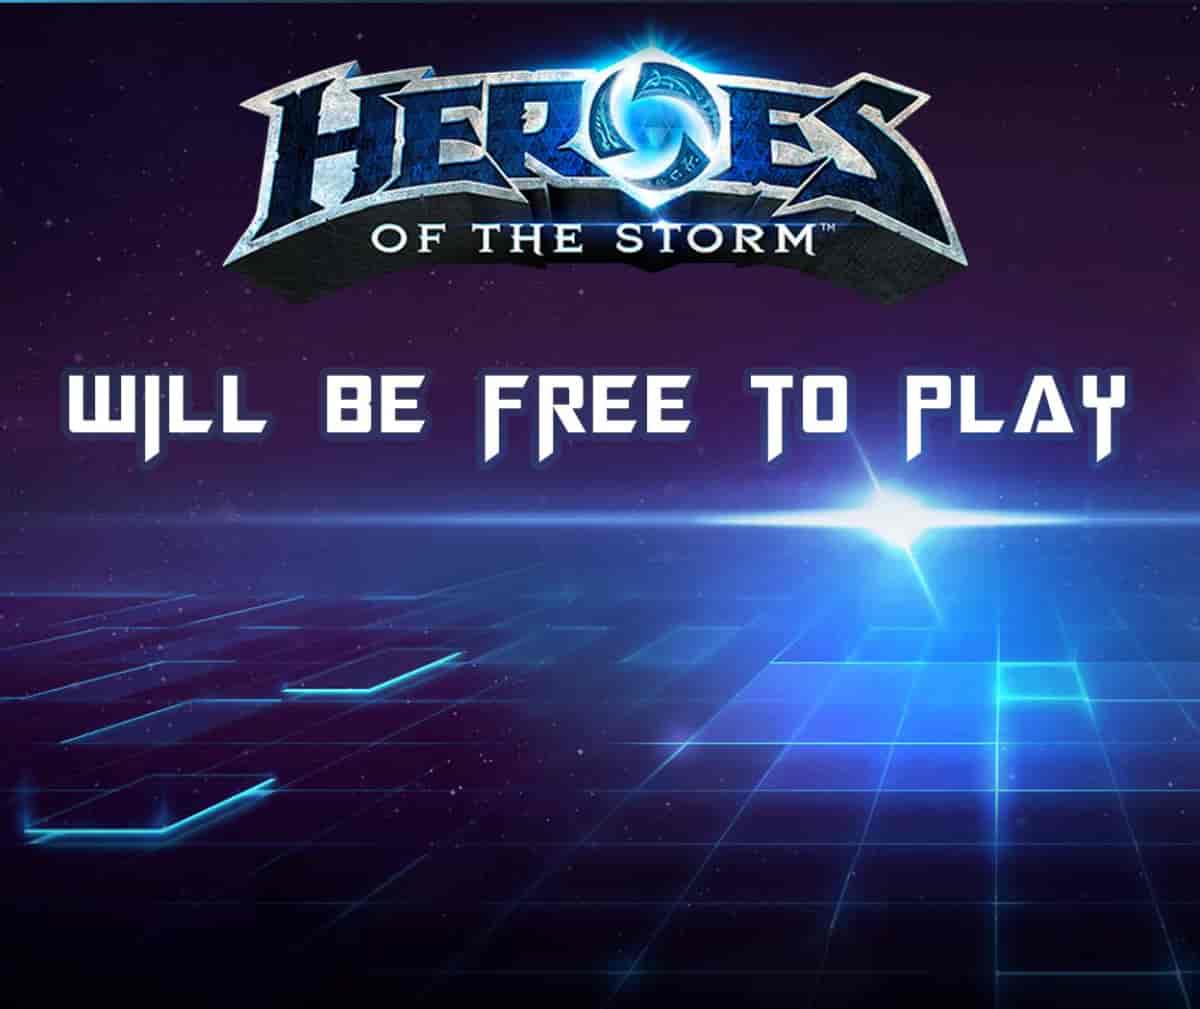 Free to play ??